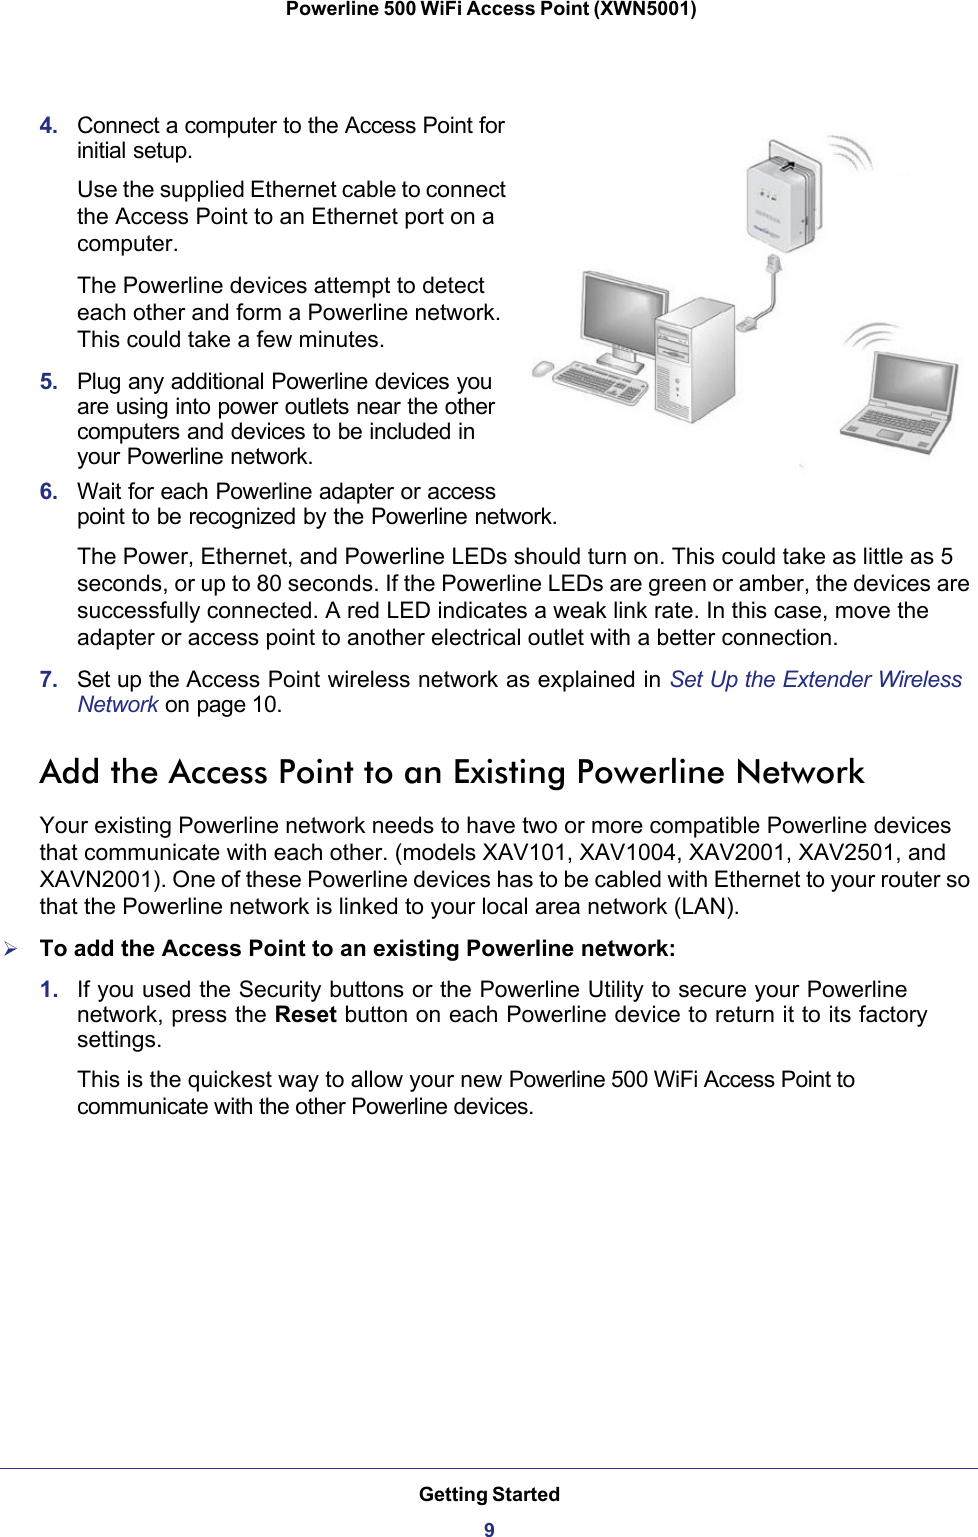 Getting Started9 Powerline 500 WiFi Access Point (XWN5001)4.  Connect a computer to the Access Point for initial setup.Use the supplied Ethernet cable to connect the Access Point to an Ethernet port on a computer. The Powerline devices attempt to detect each other and form a Powerline network. This could take a few minutes.5.  Plug any additional Powerline devices you are using into power outlets near the other computers and devices to be included in your Powerline network. 6.  Wait for each Powerline adapter or access point to be recognized by the Powerline network. The Power, Ethernet, and Powerline LEDs should turn on. This could take as little as 5 seconds, or up to 80 seconds. If the Powerline LEDs are green or amber, the devices are successfully connected. A red LED indicates a weak link rate. In this case, move the adapter or access point to another electrical outlet with a better connection. 7.  Set up the Access Point wireless network as explained in Set Up the Extender Wireless Network on page 10.Add the Access Point to an Existing Powerline NetworkYour existing Powerline network needs to have two or more compatible Powerline devices that communicate with each other. (models XAV101, XAV1004, XAV2001, XAV2501, and XAVN2001). One of these Powerline devices has to be cabled with Ethernet to your router so that the Powerline network is linked to your local area network (LAN). To add the Access Point to an existing Powerline network:1.  If you used the Security buttons or the Powerline Utility to secure your Powerline network, press the Reset button on each Powerline device to return it to its factory settings.This is the quickest way to allow your new Powerline 500 WiFi Access Point to communicate with the other Powerline devices.